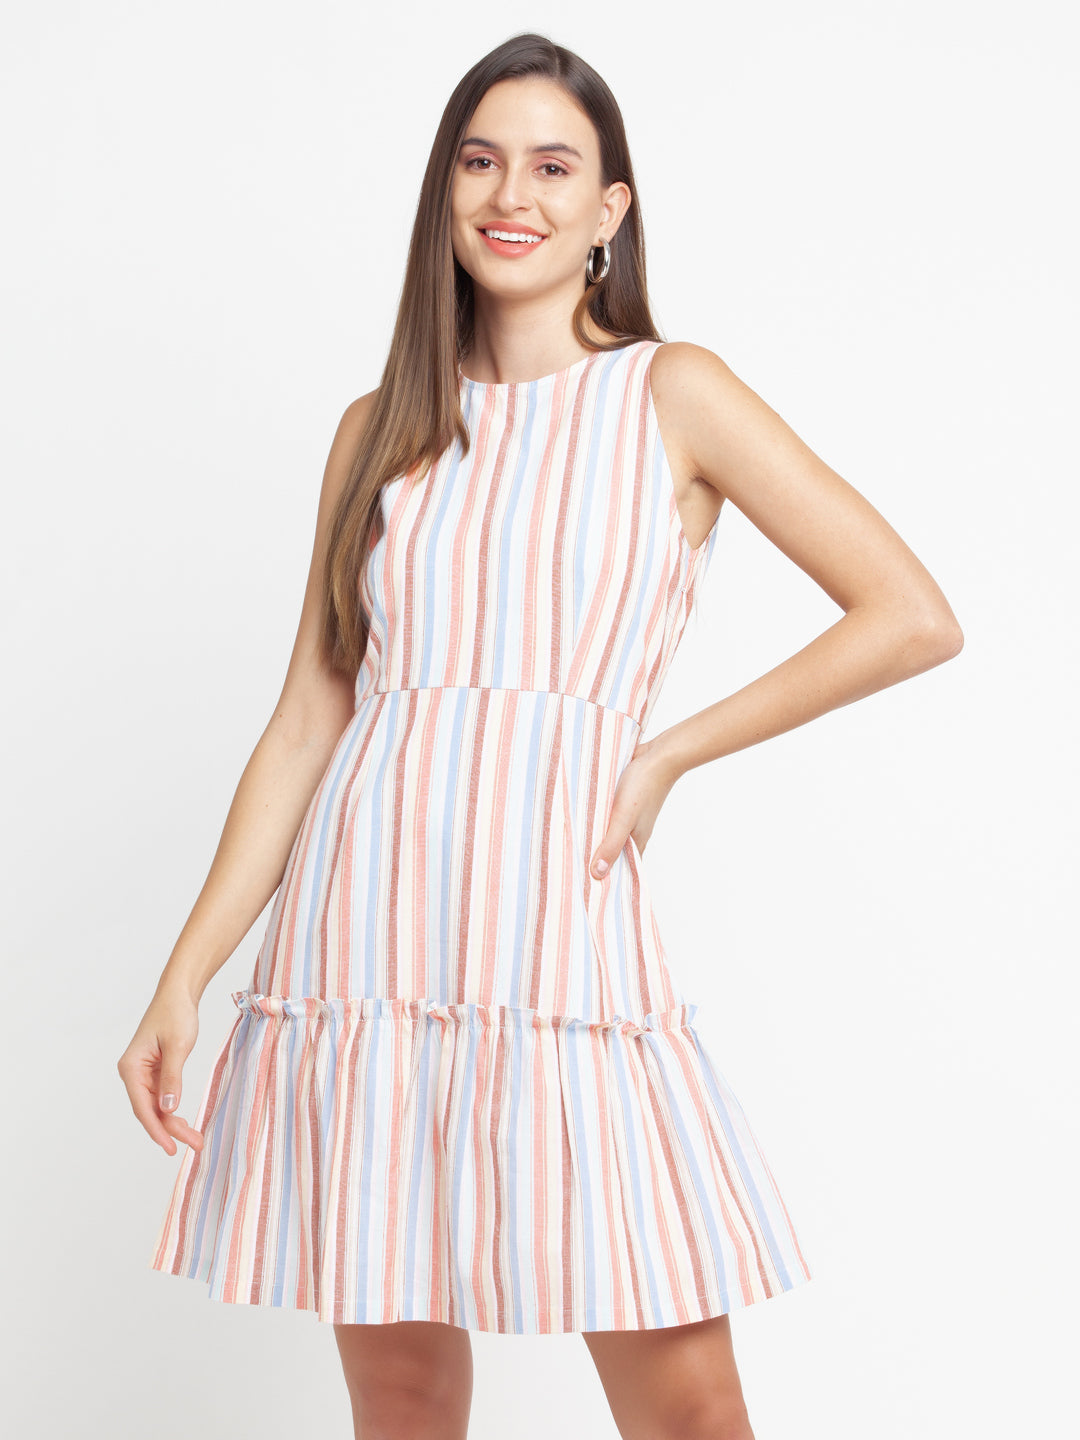 Multicolored Striped Tiered Short Dress For Women